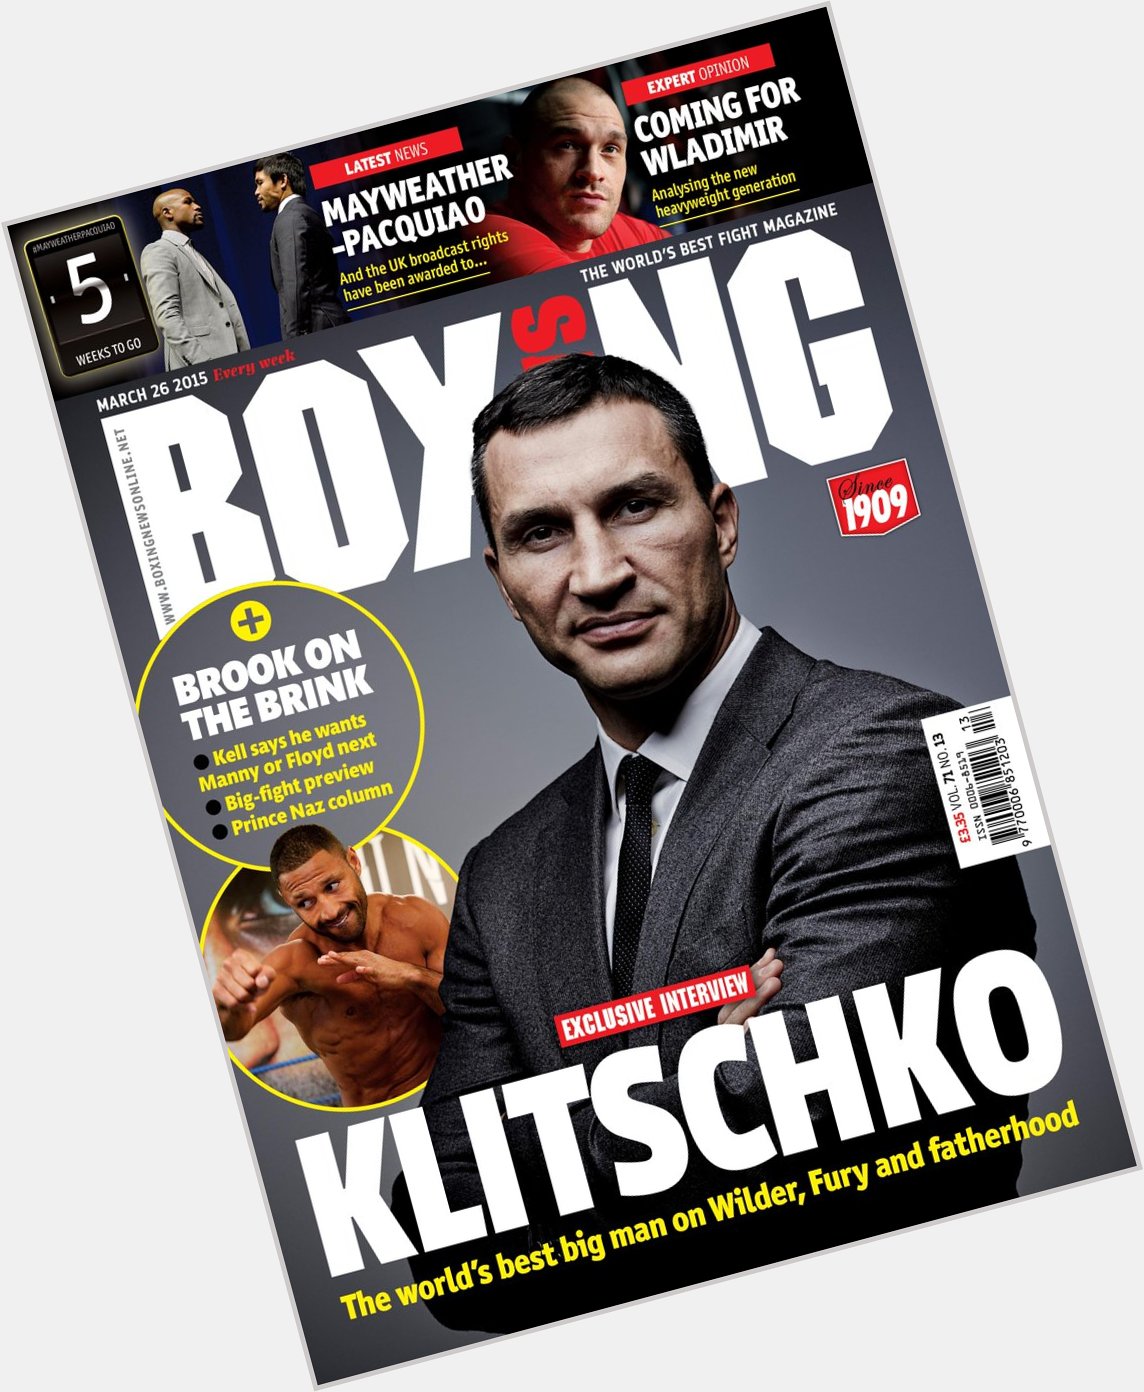 Happy birthday Wladimir Celebrate by reading the big feature in 